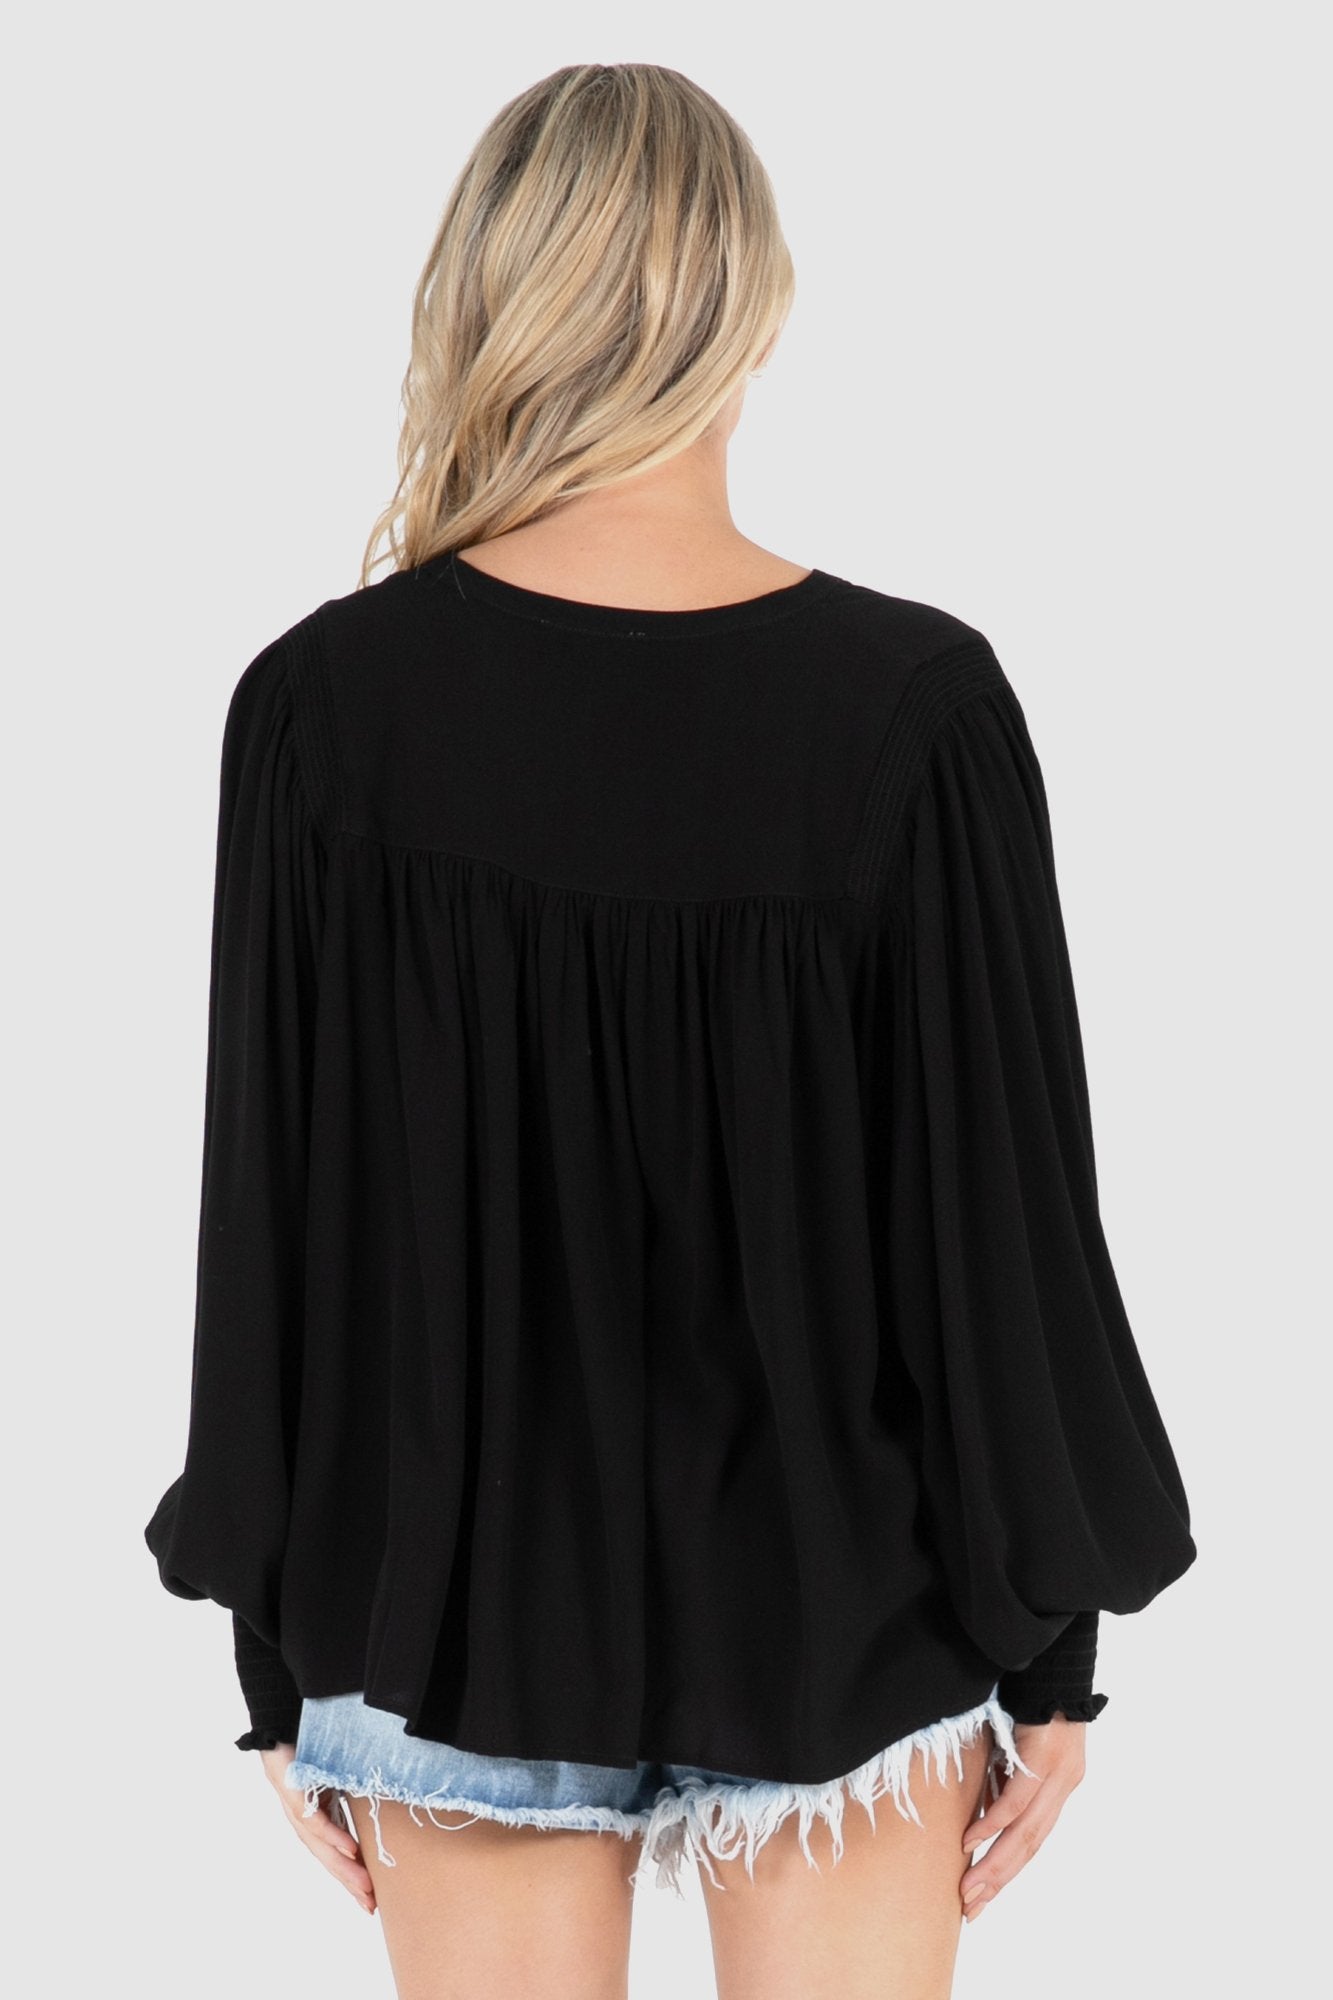 Sass Neeve Blouse in Black Size 10 or 14 - Hey Sara